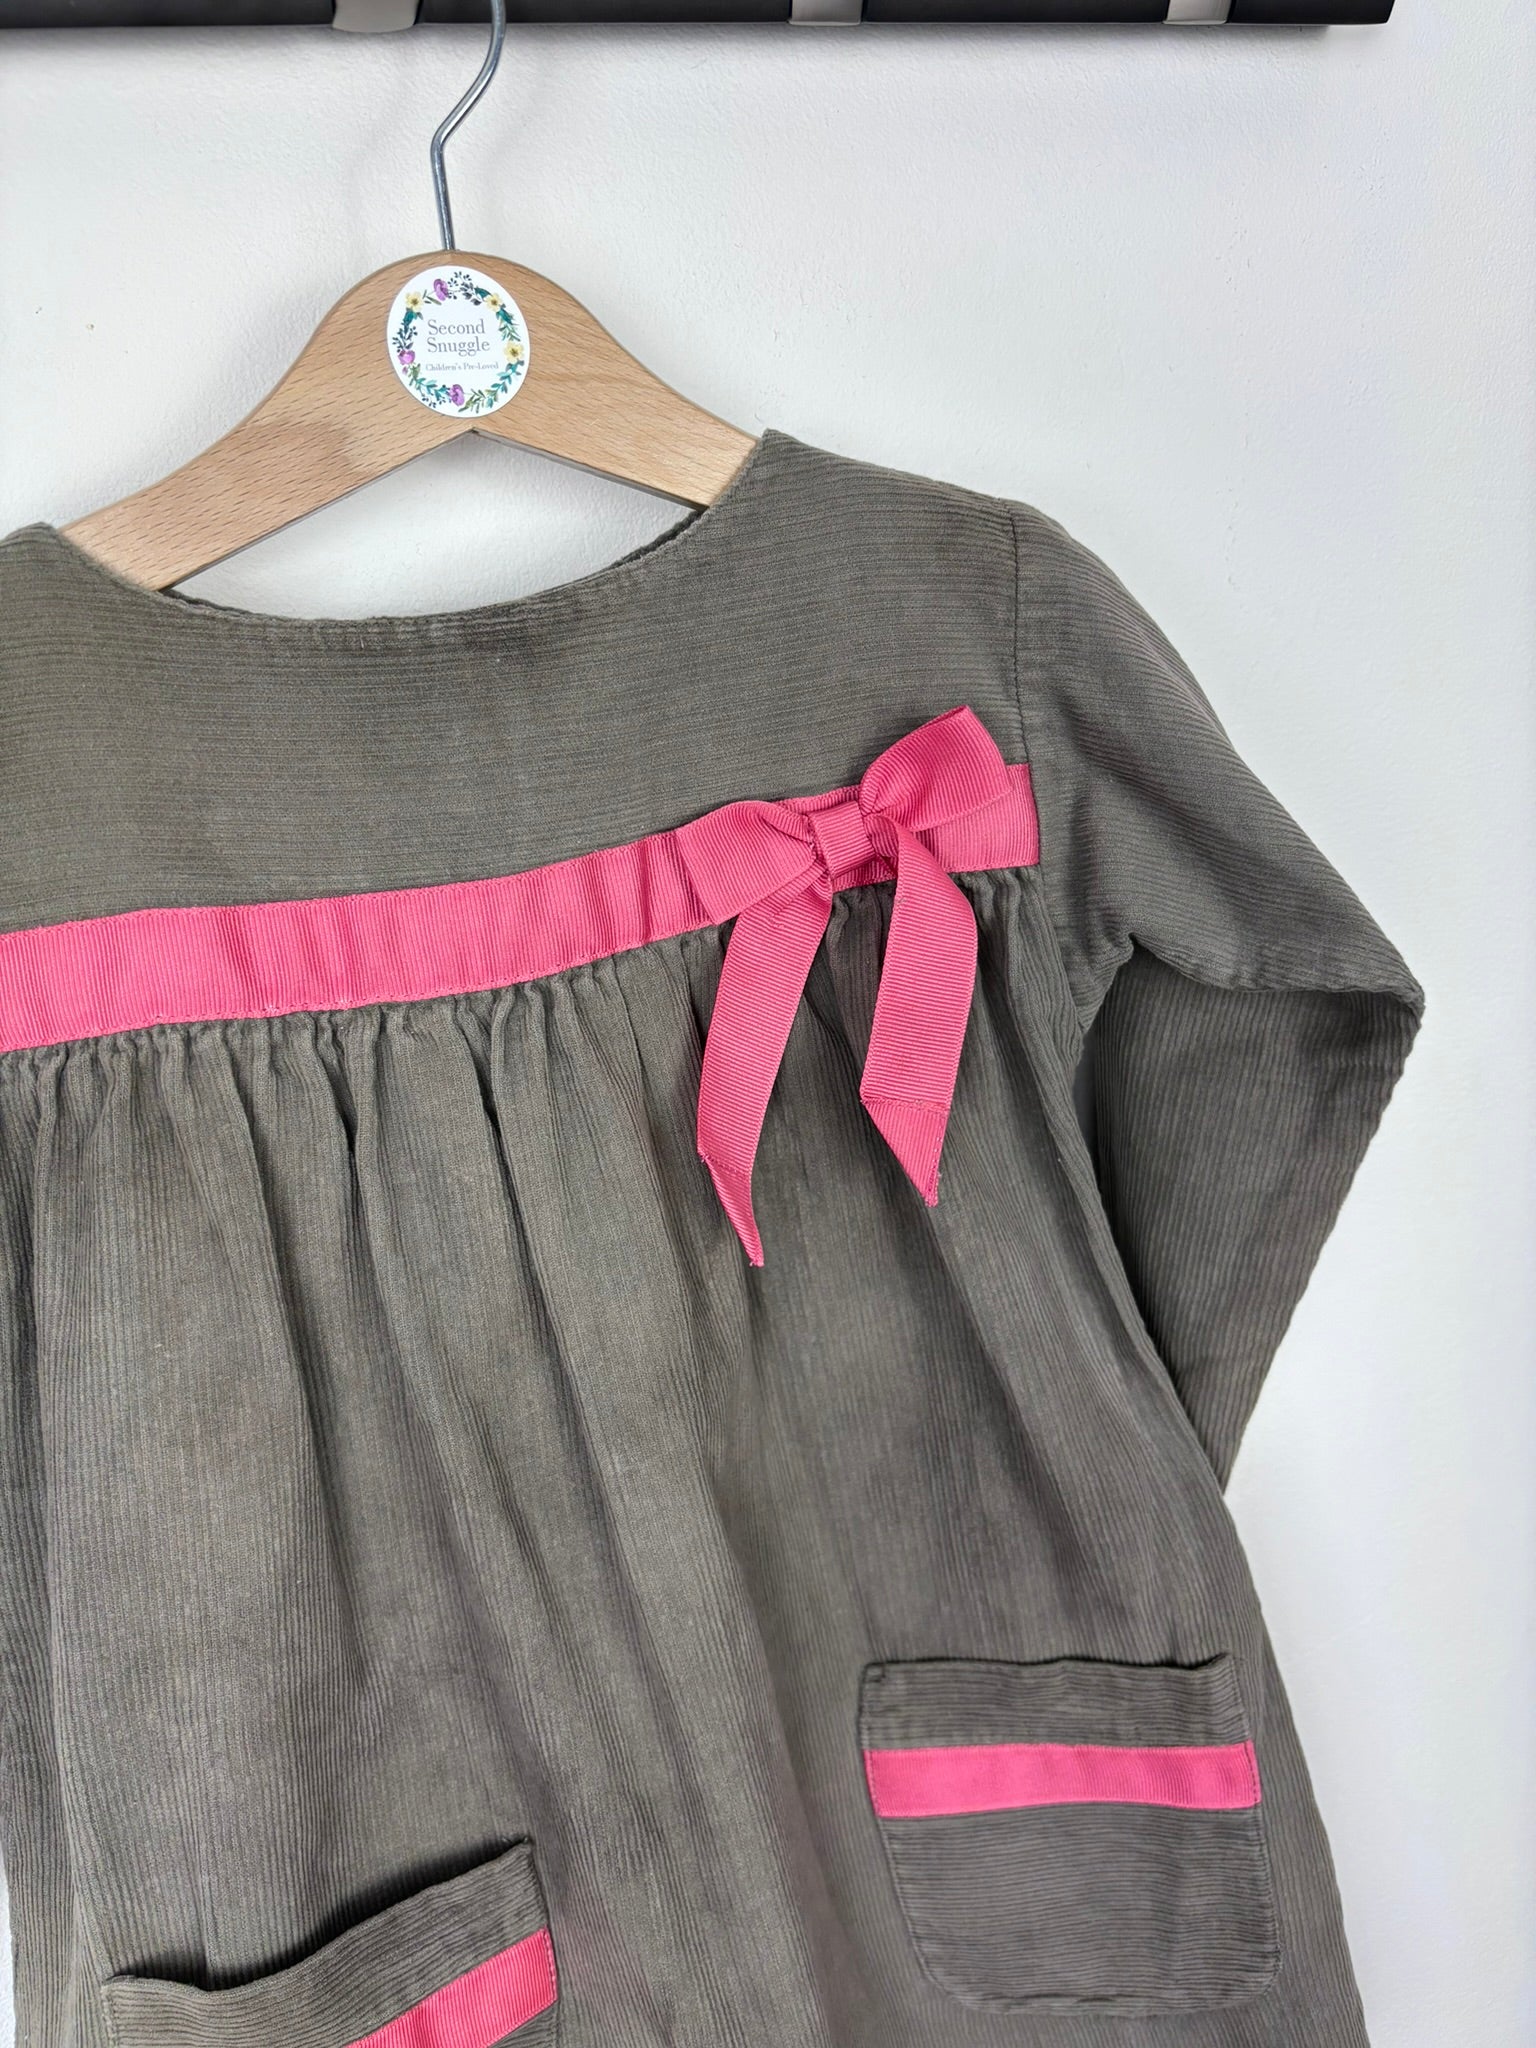 Little Duckling 2-3 Years-Dresses-Second Snuggle Preloved